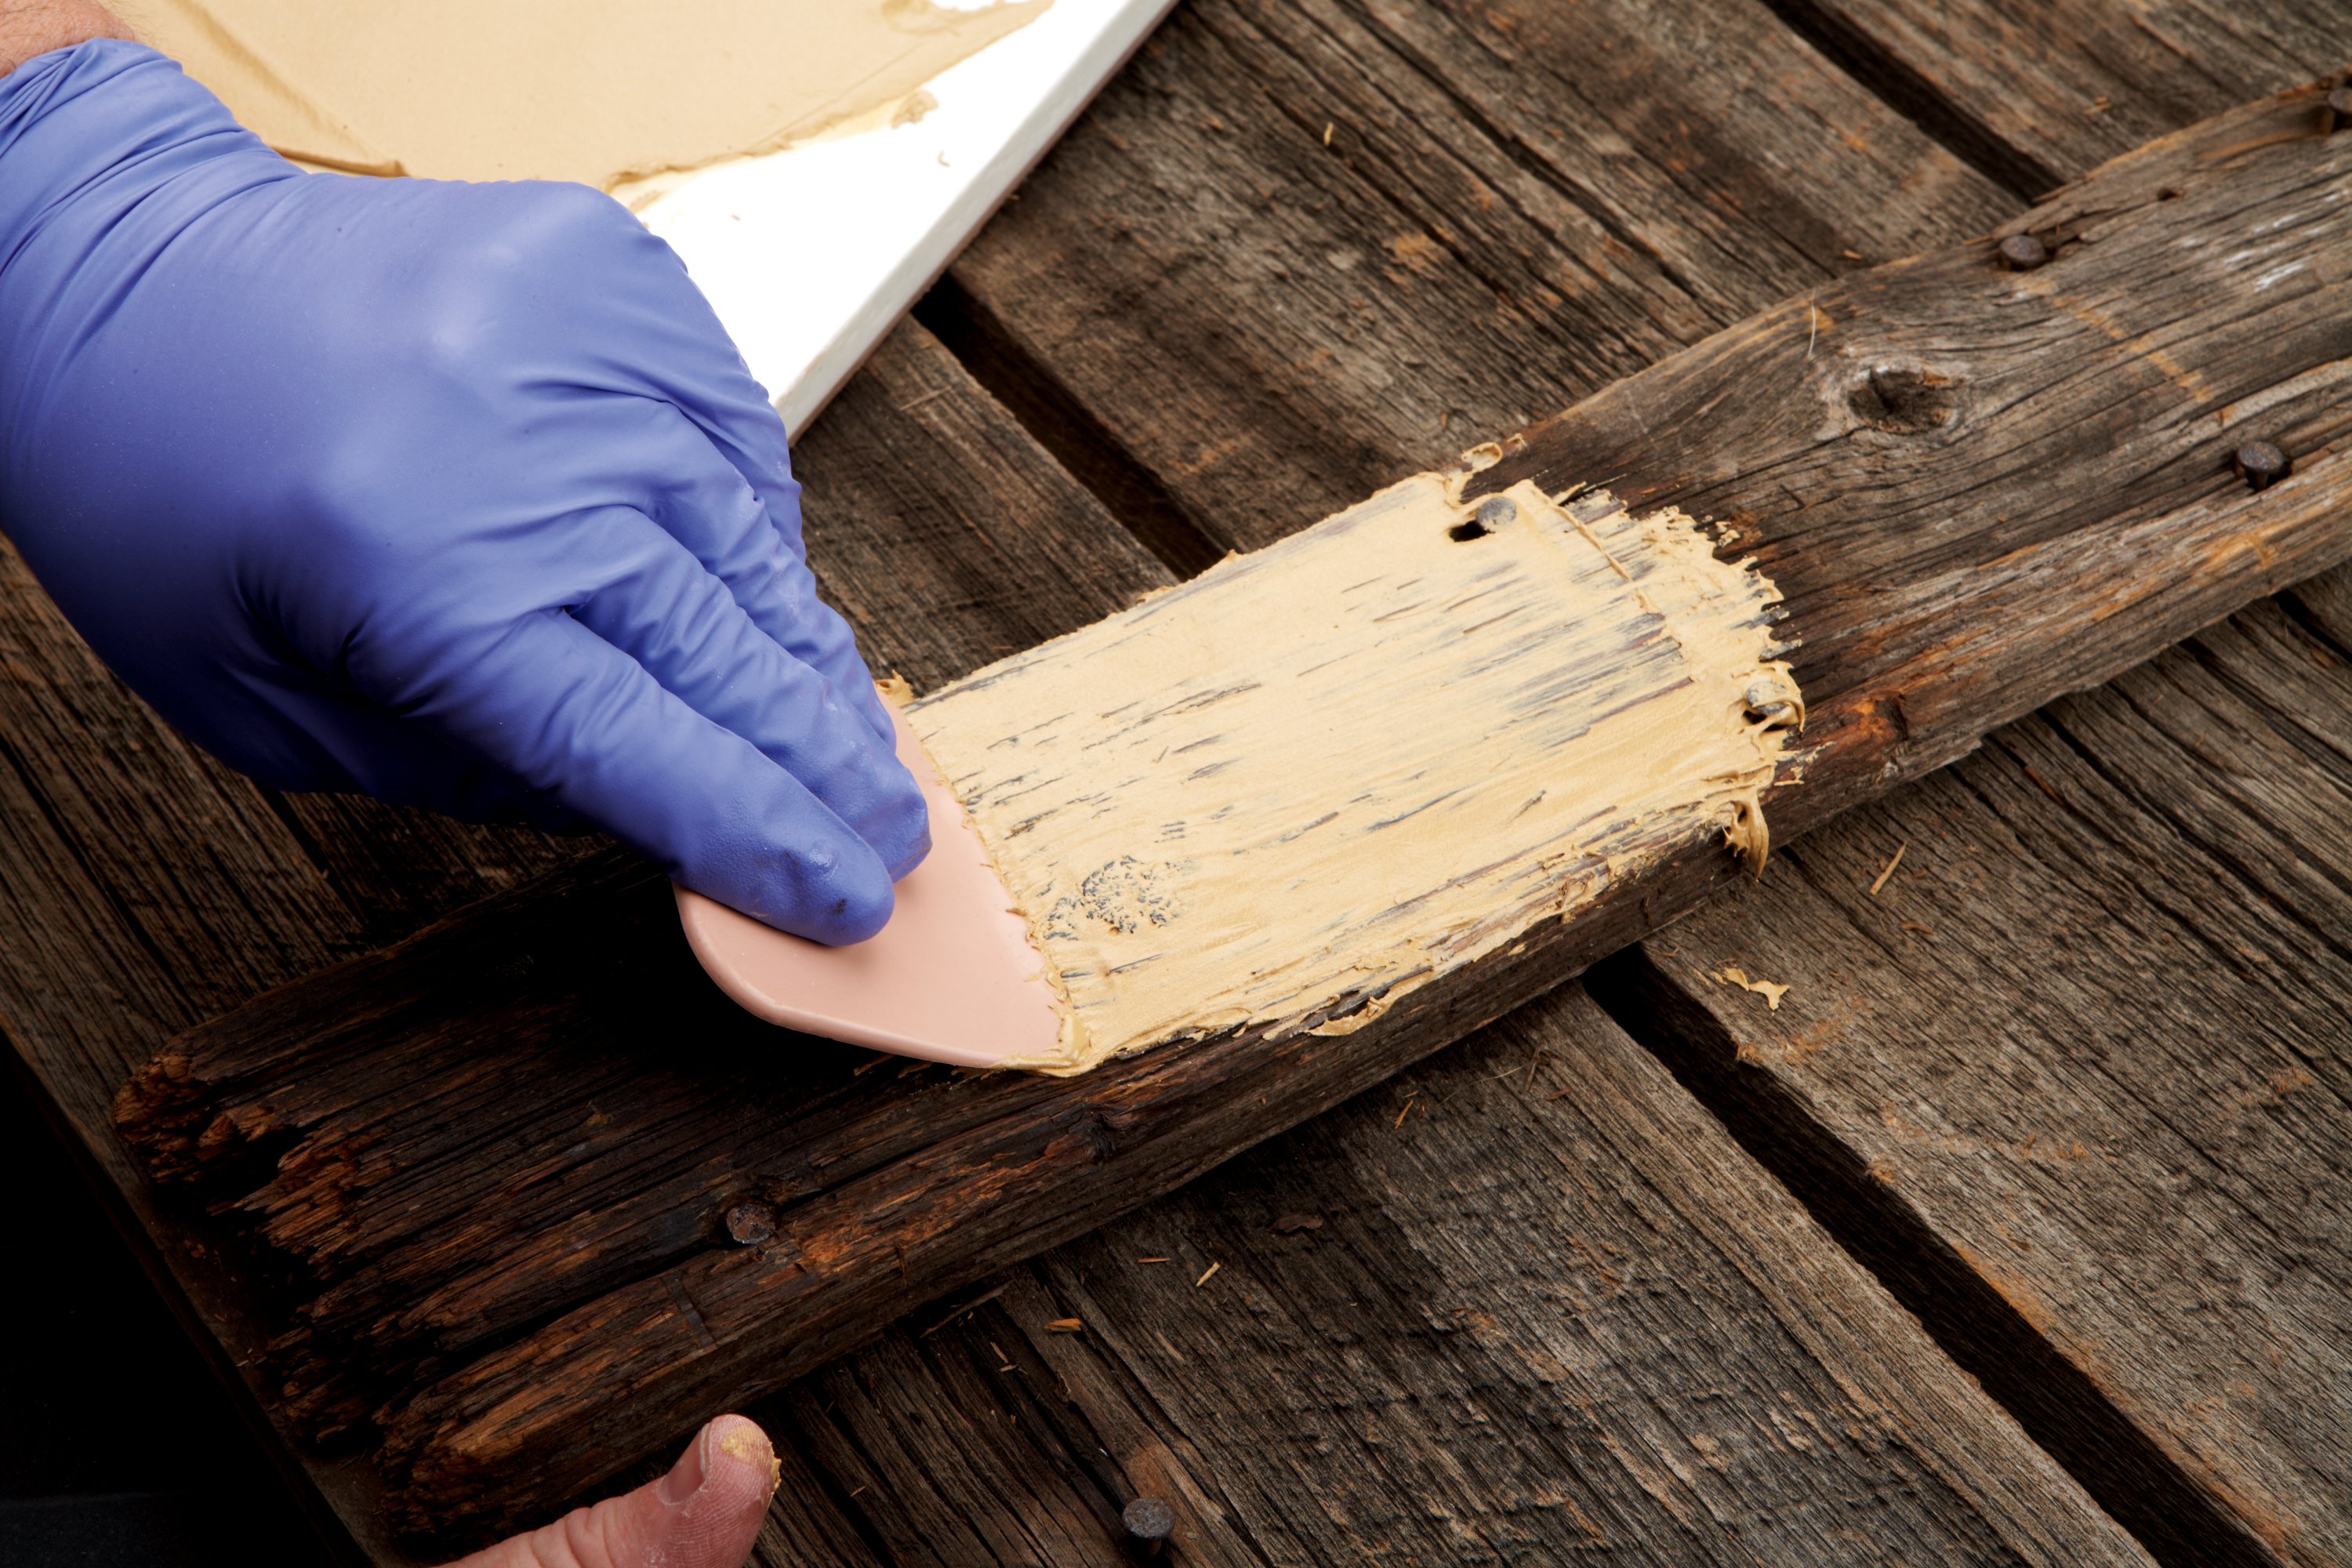 Bondo®  Wood Filler can handle nearly any wood repair —  fill minor holes or scratches, or rebuild entire missing wood pieces.